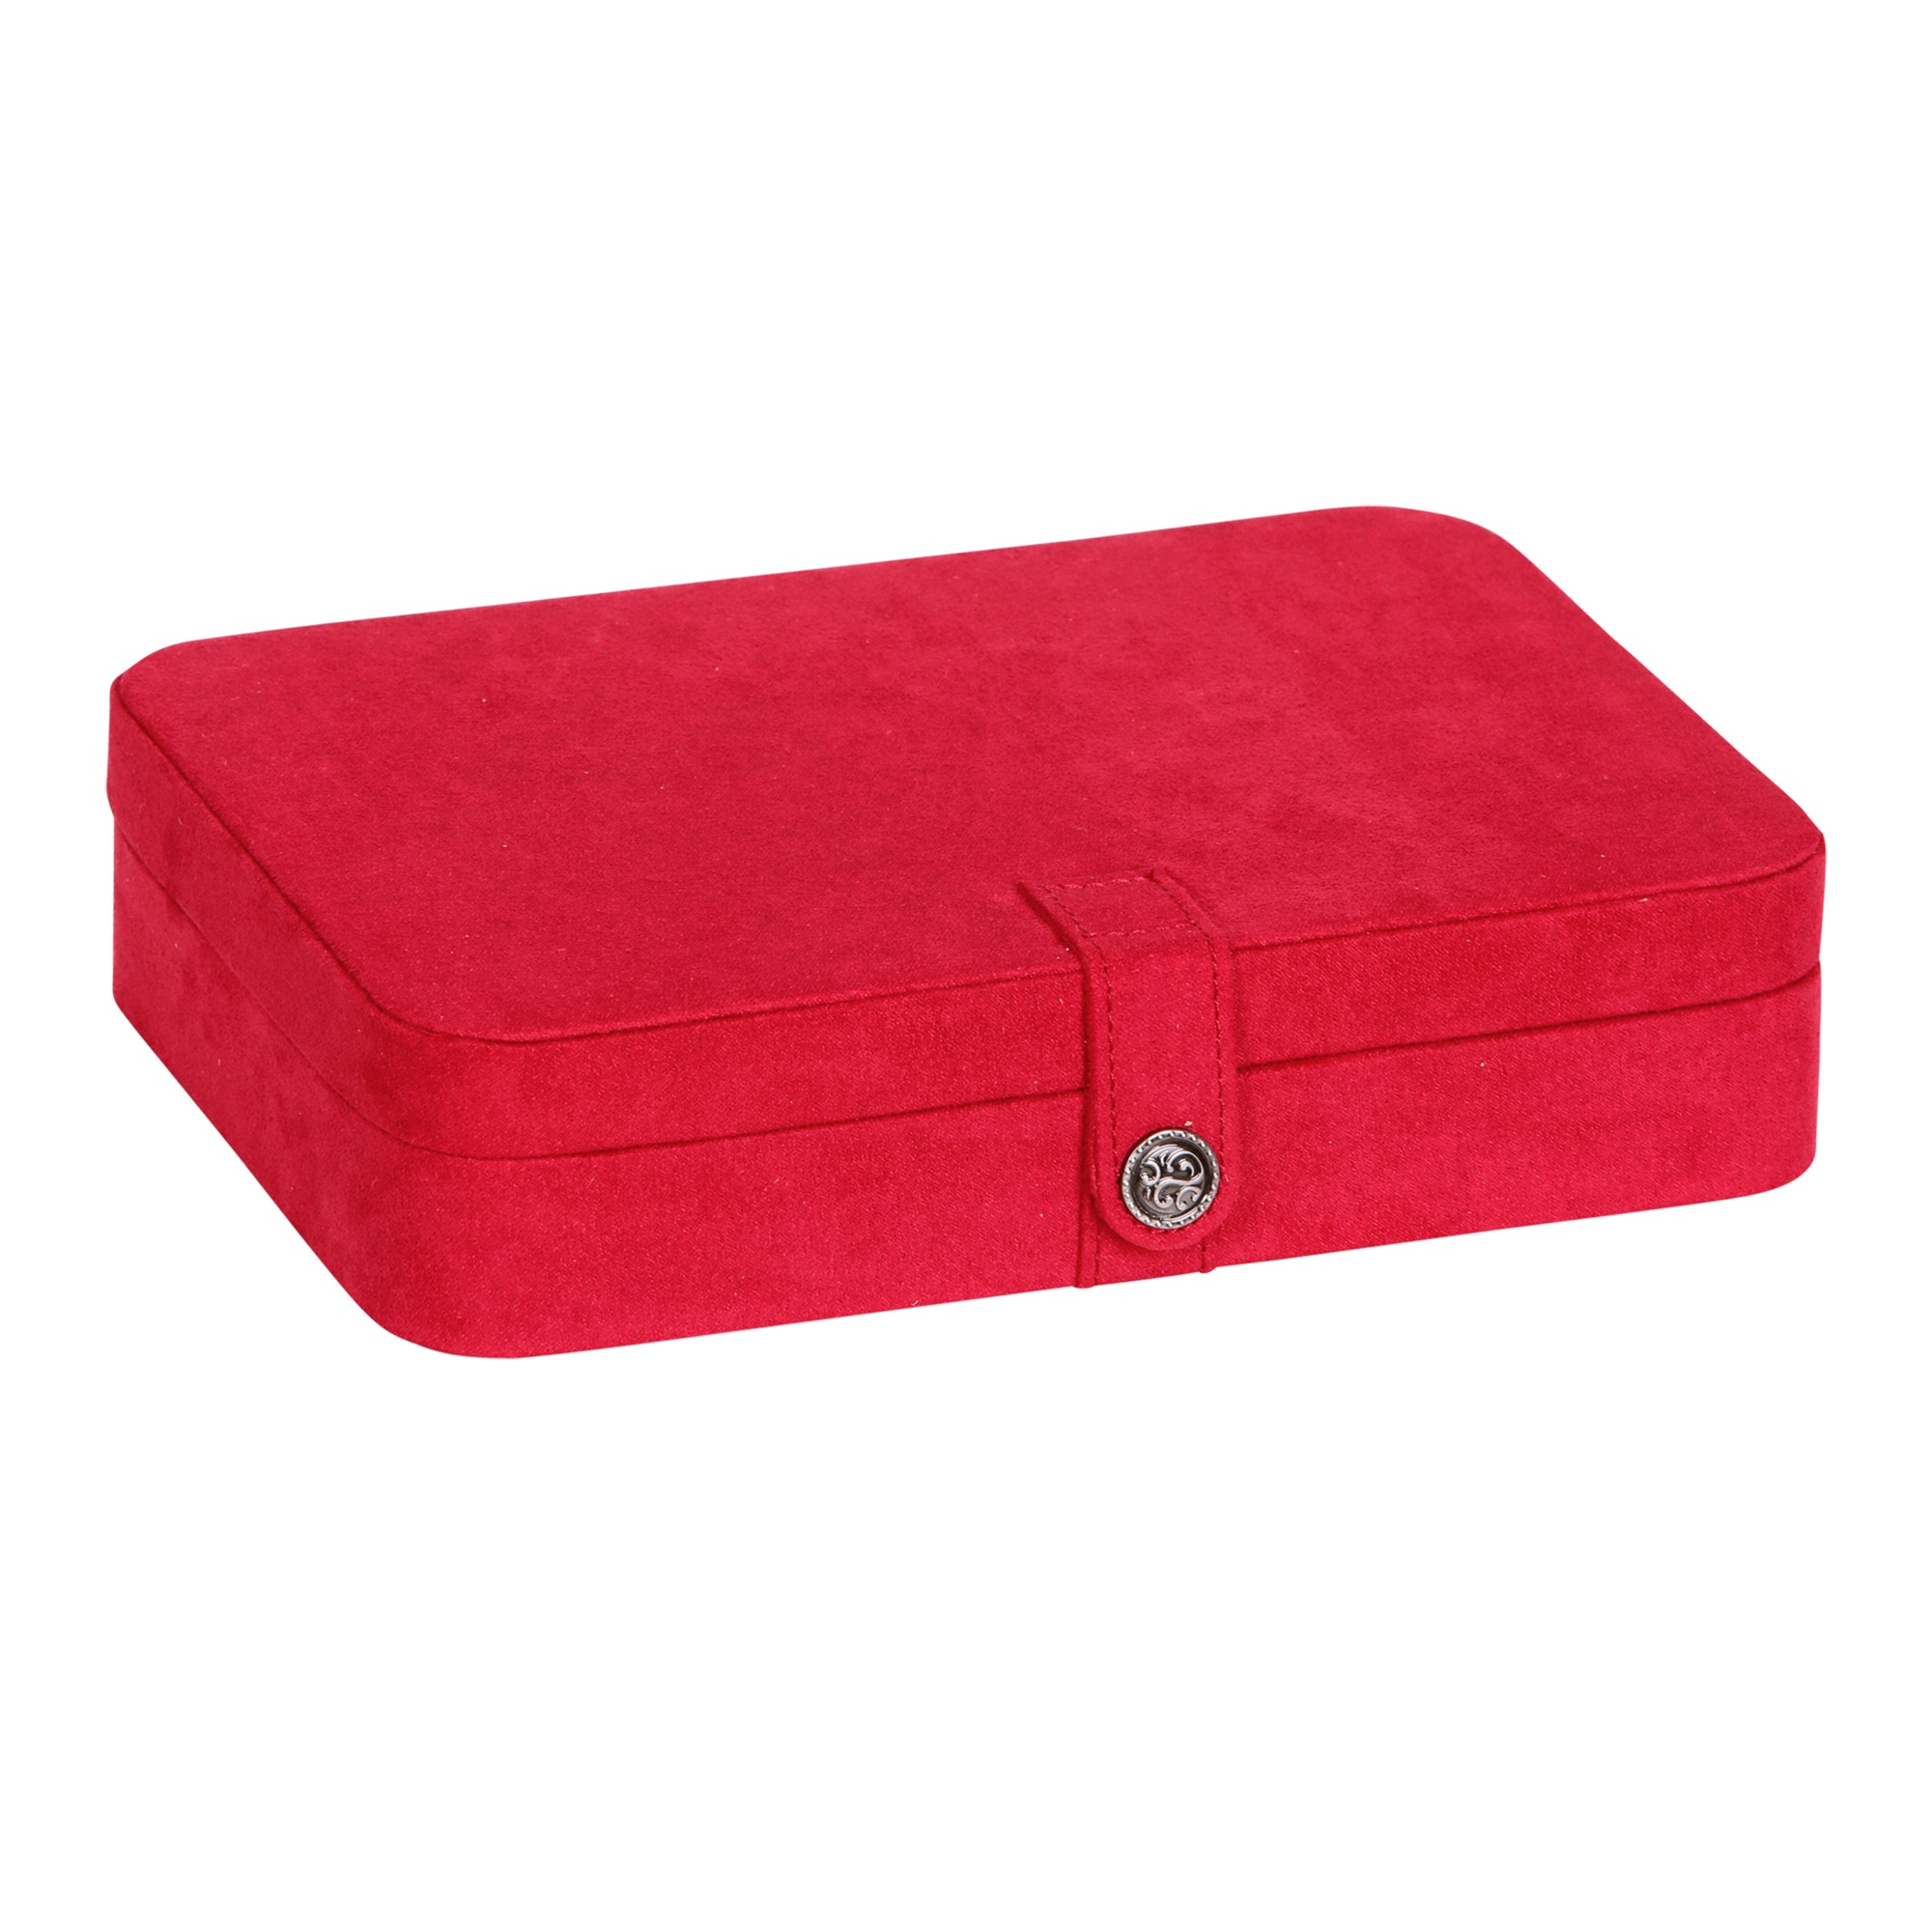 Mele and Co Maria Plush Fabric Jewelry Box with Twenty-Four Sections in Red - image 1 of 3